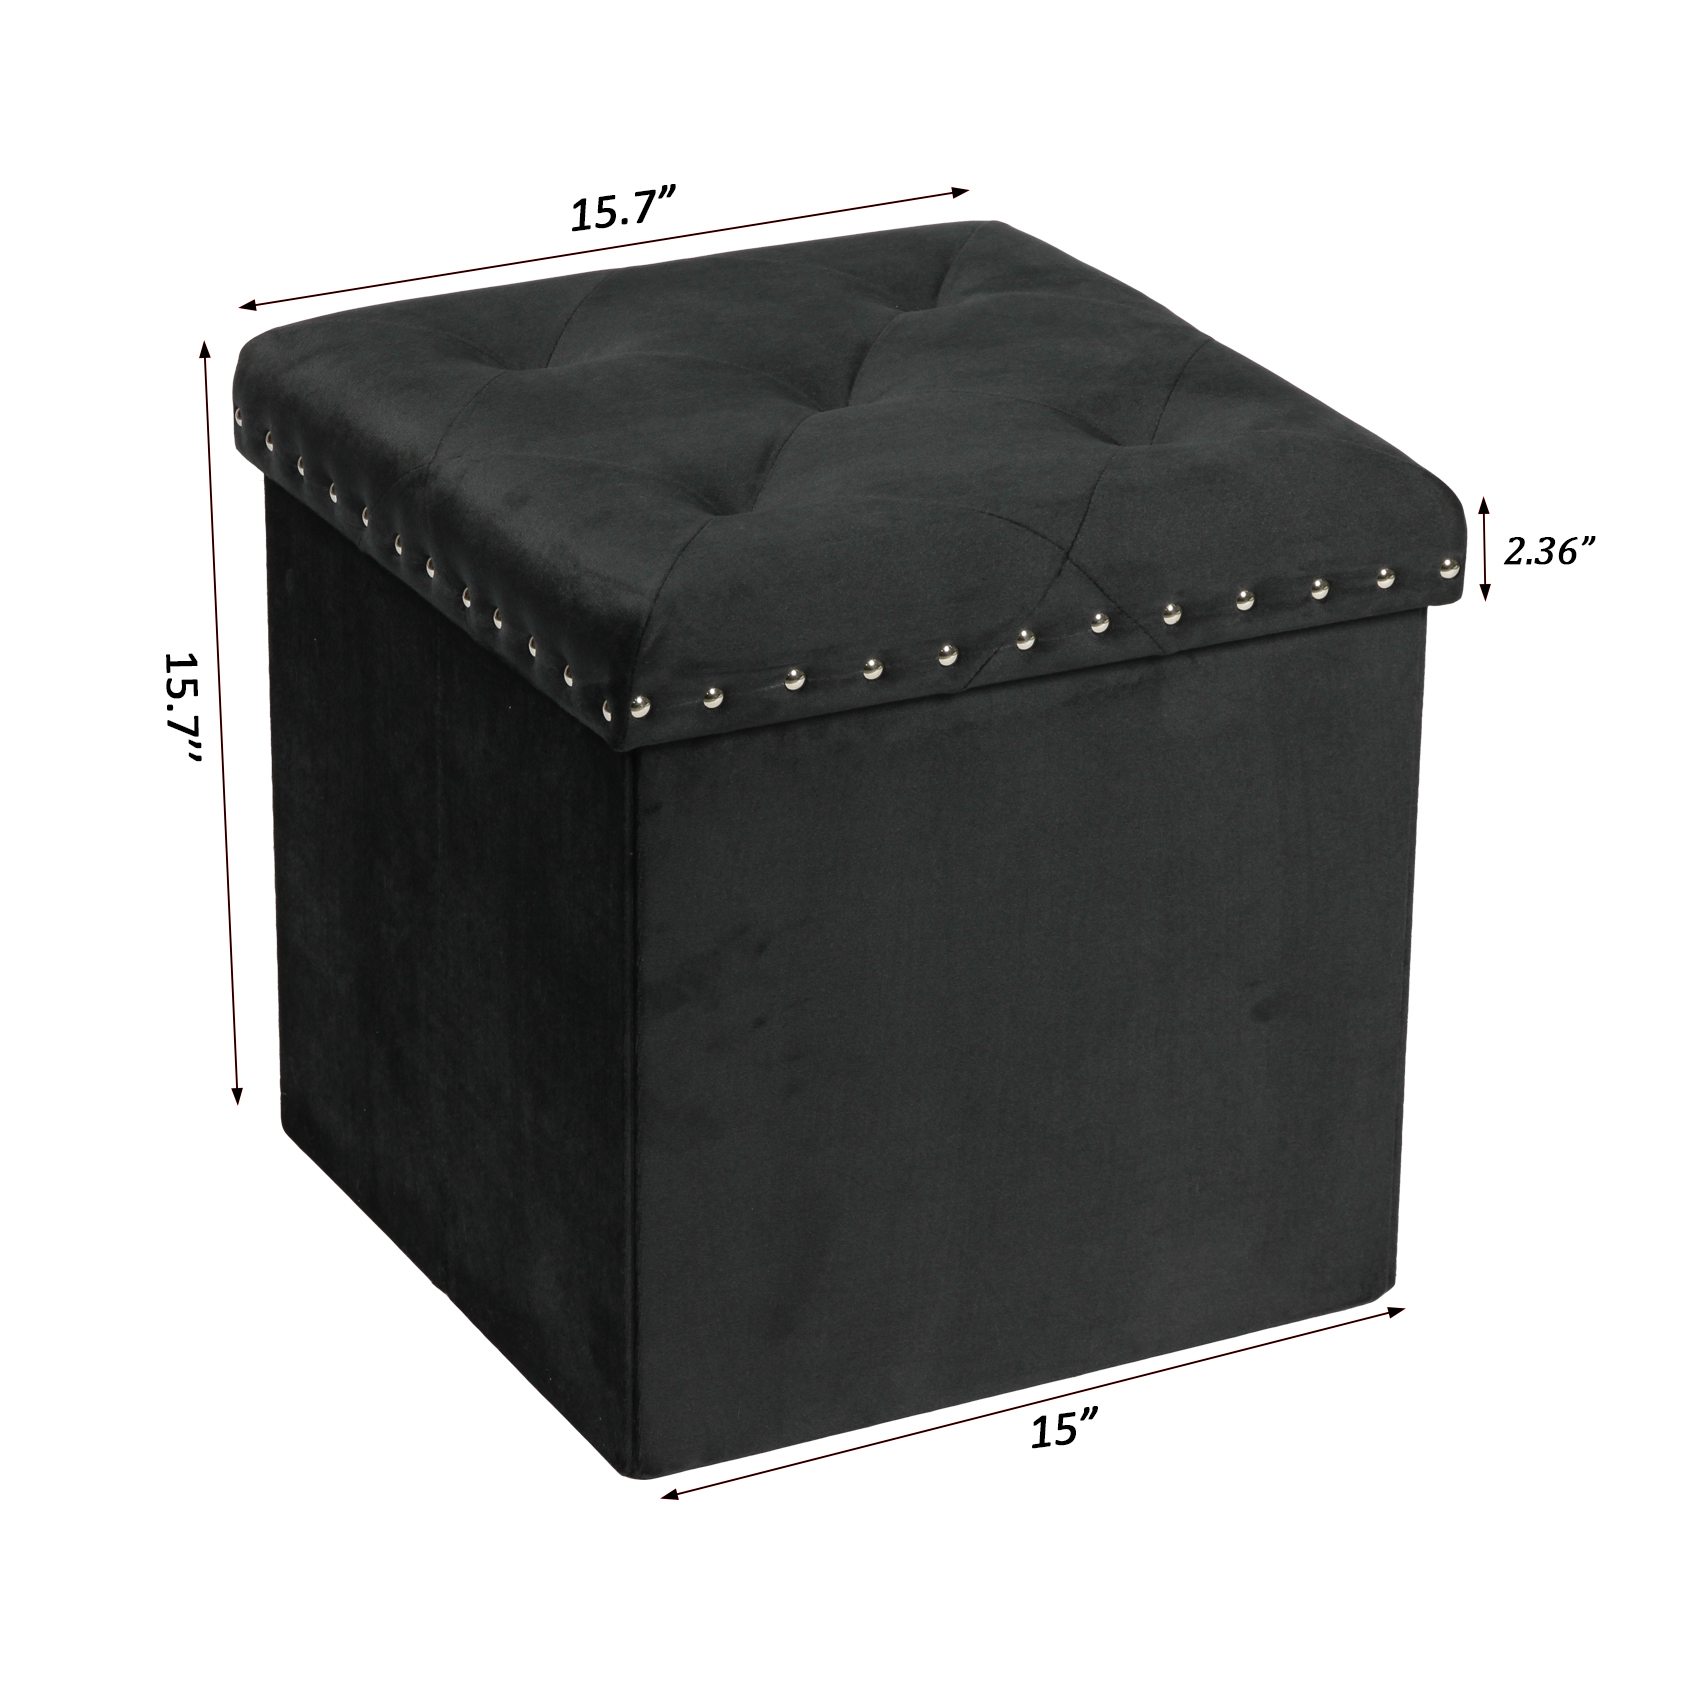 PINPLUS 15.7" Black Velvet Folding Storage Ottoman Cube, Small Foot Rest Stool, Window Seat for Living Room, Toy Chest Box with Rivet Tray - image 3 of 8